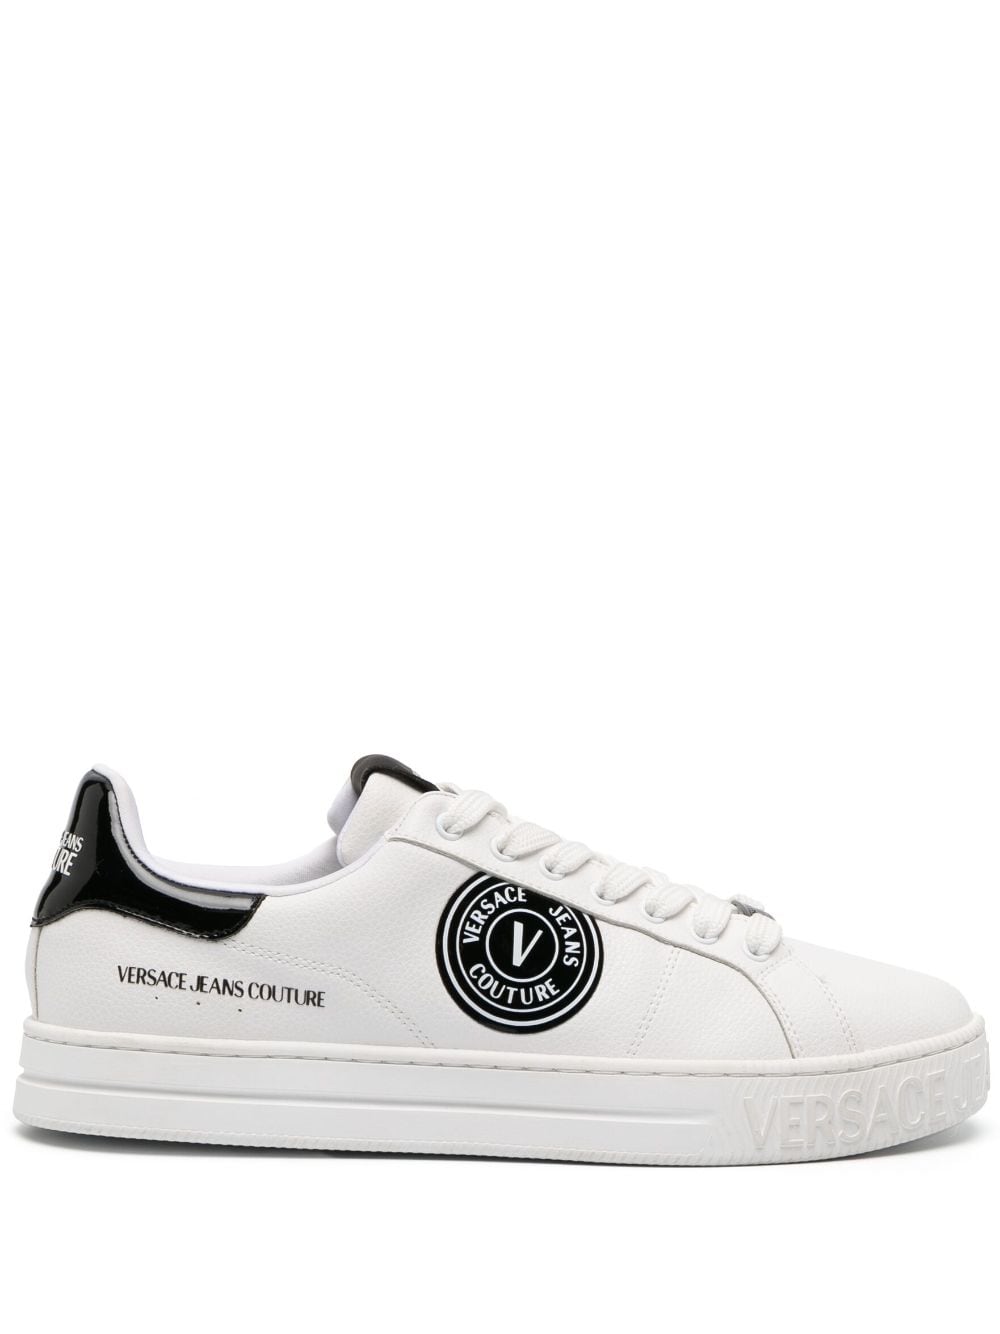 Versace Jeans Couture logo-patch leather low-top sneakers - White von Versace Jeans Couture